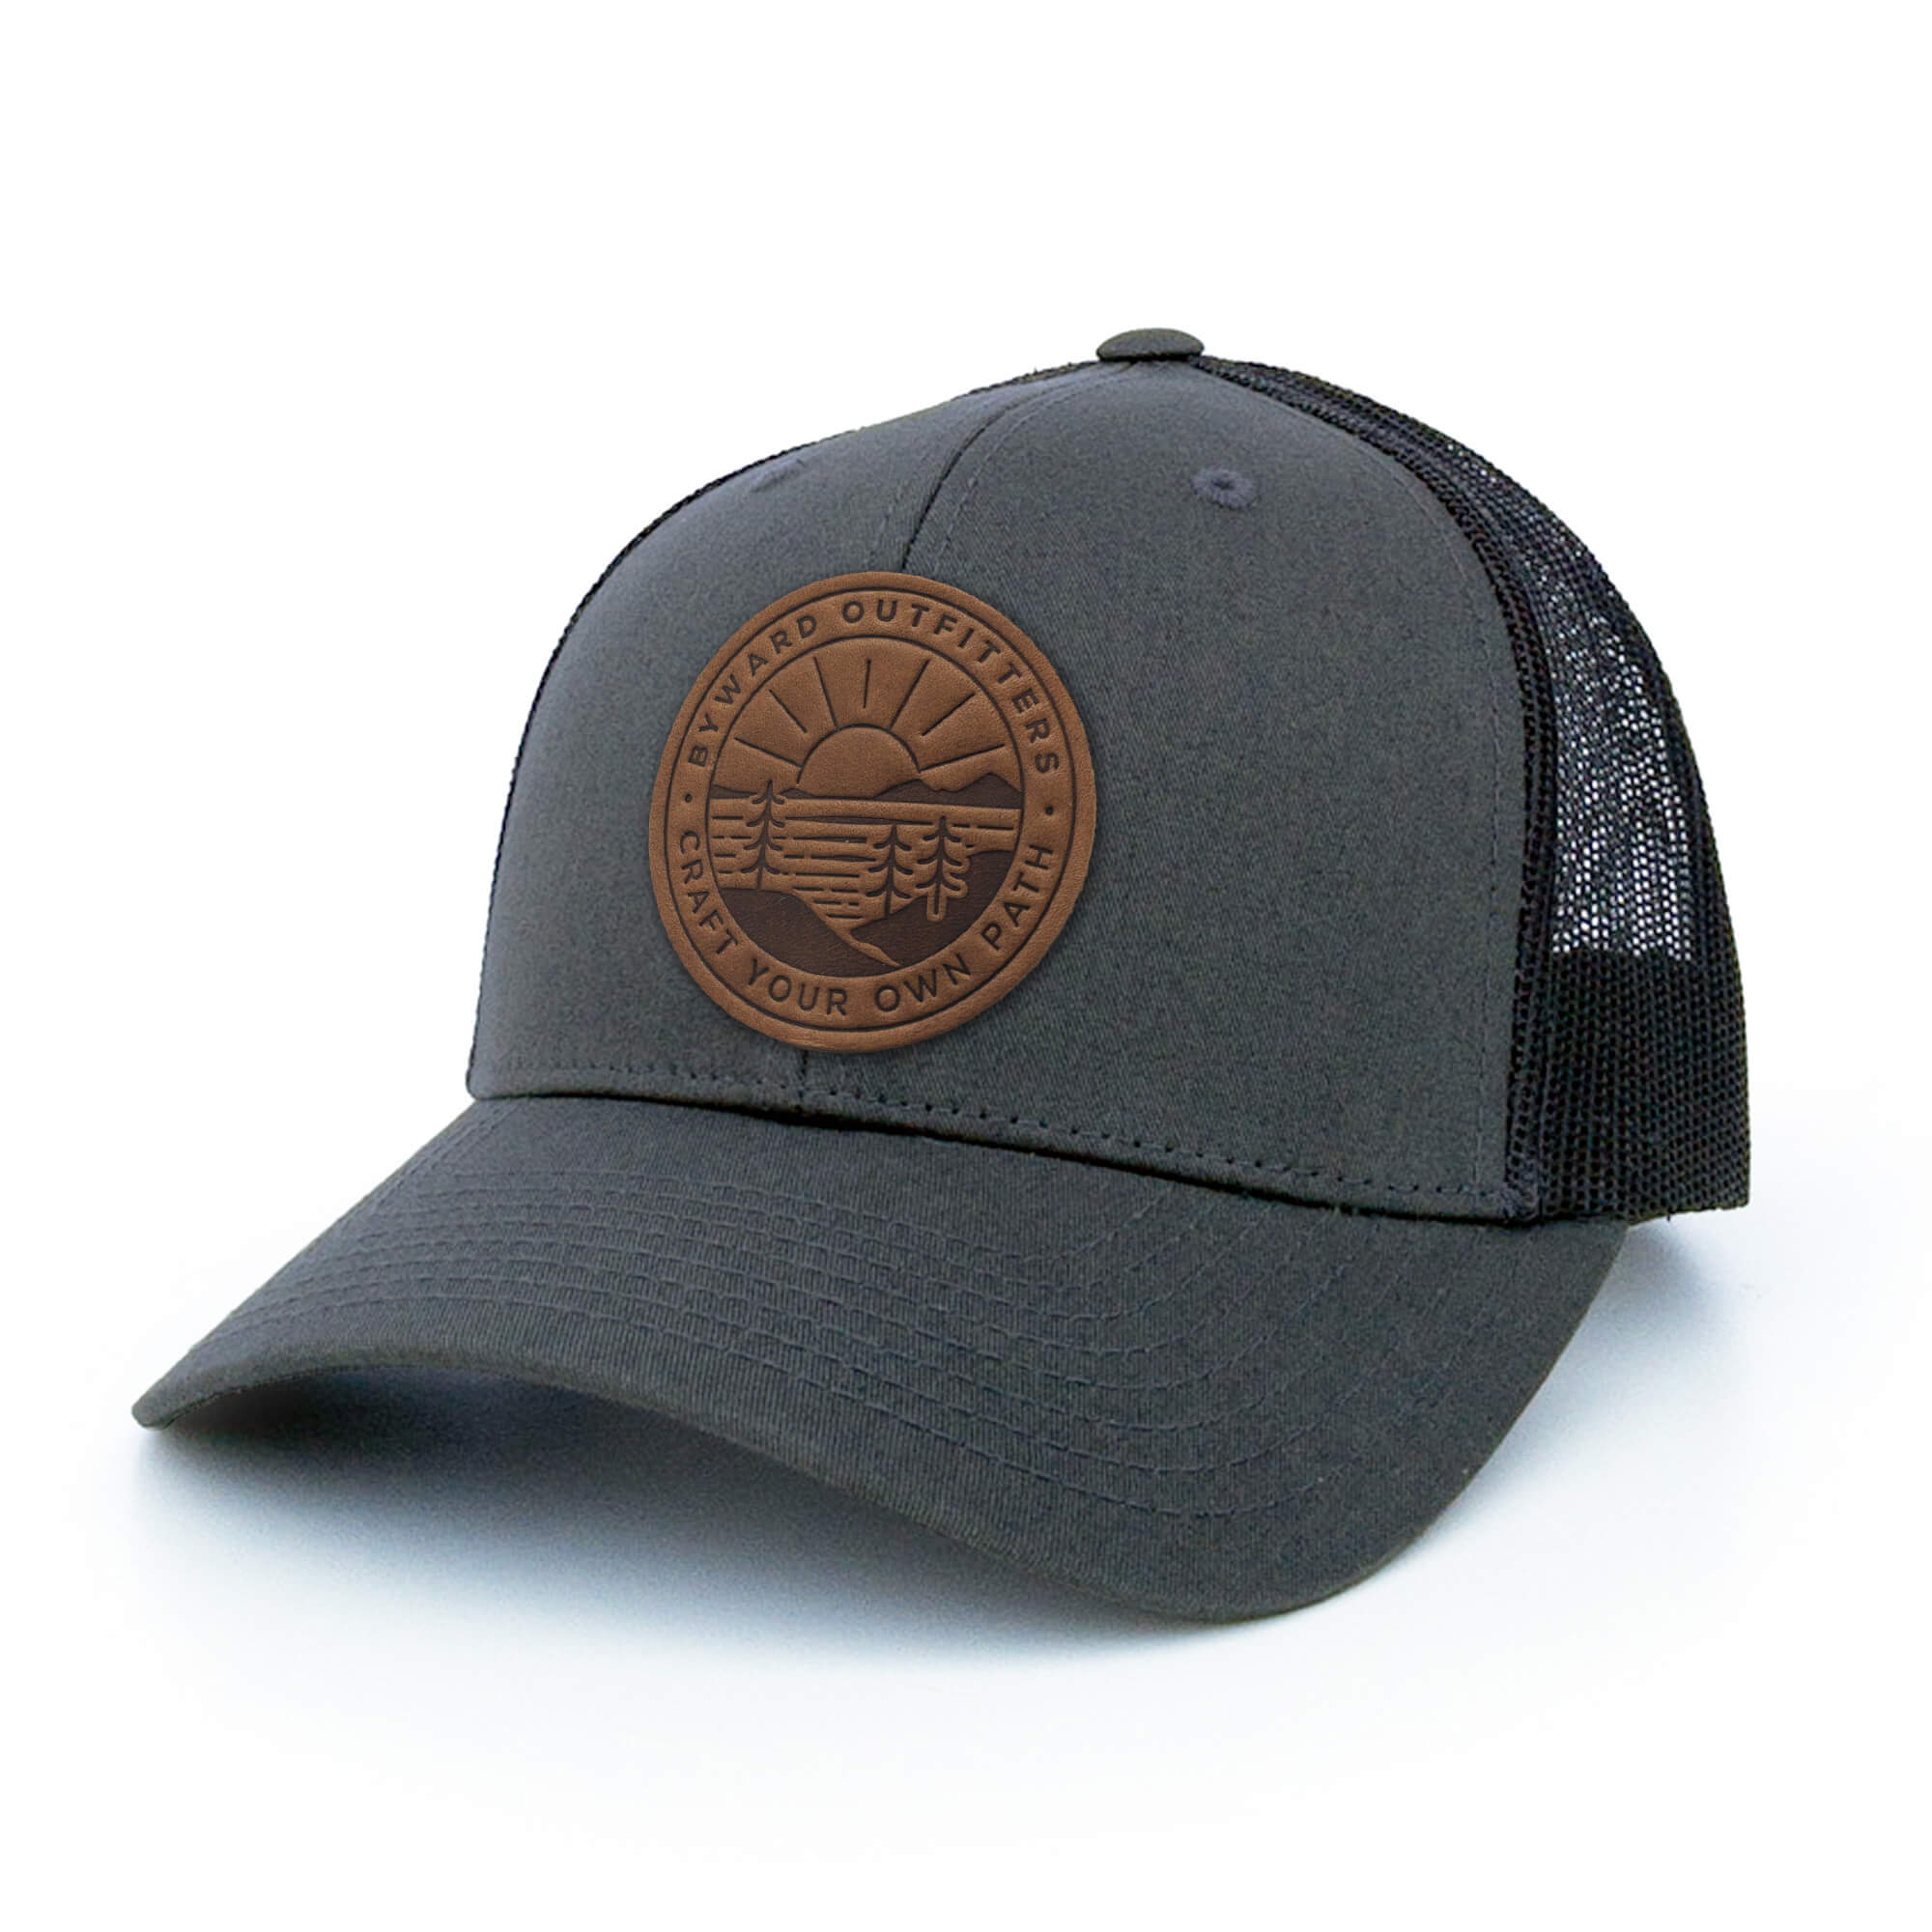 Charcoal trucker hat with full-grain leather patch of Scenic Sunrise | BLACK-005-002, CHARC-005-002, NAVY-005-002, HGREY-005-002, MOSS-005-002, BROWN-005-002